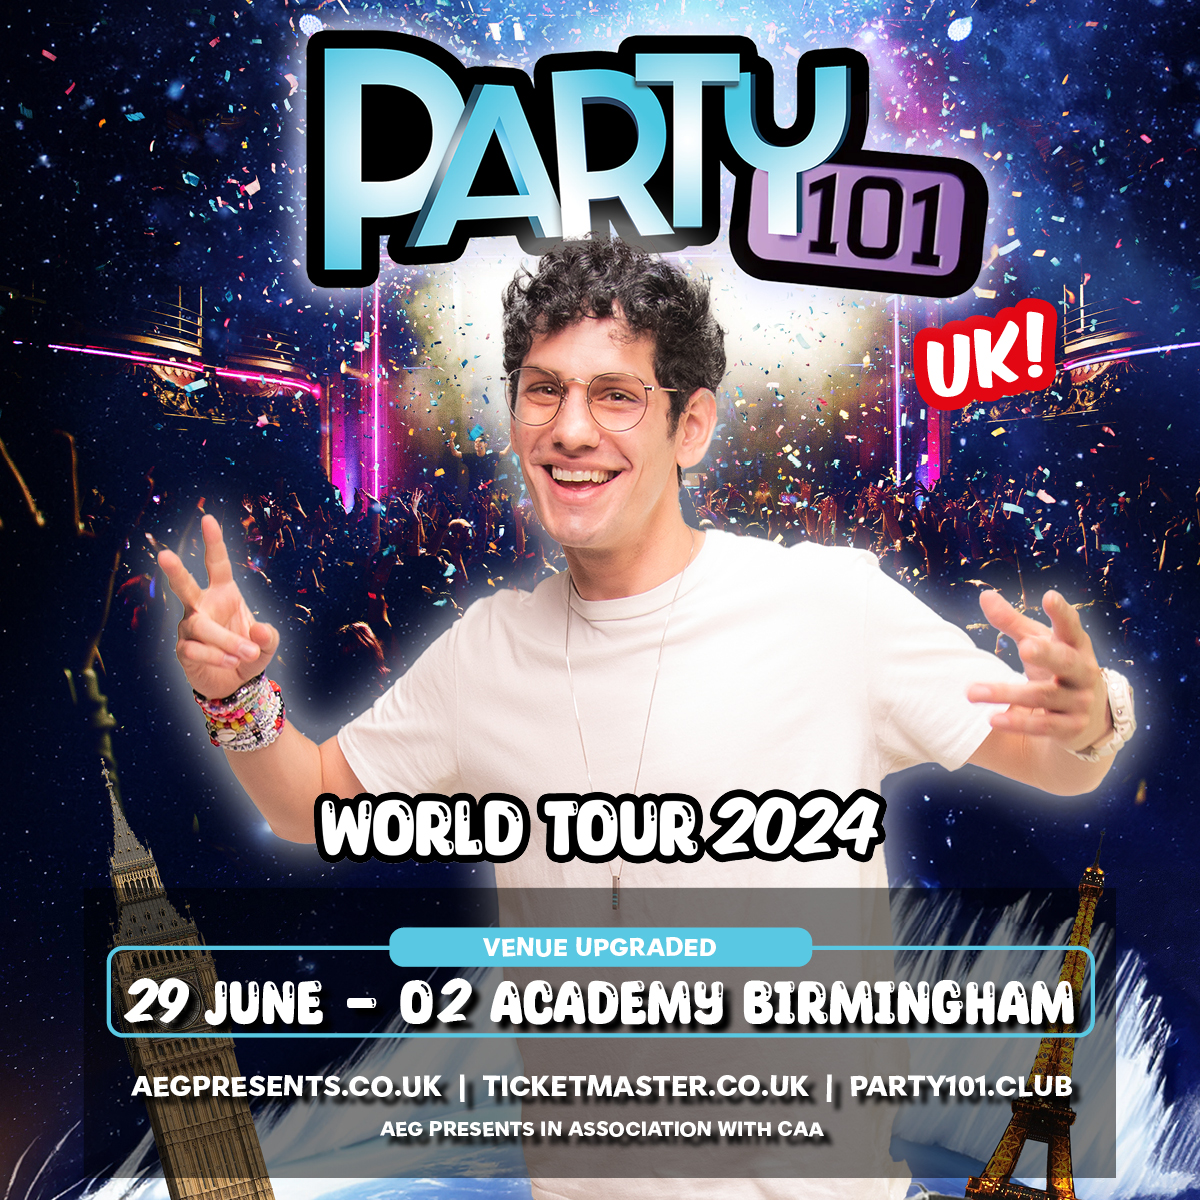 Due to phenomenal demand #Party101 with @MattBennett has been upgraded and will take place here on the same date - Saturday 29 June. All original tickets remain valid! Tickets available - amg-venues.com/O0Ez50RcUvG